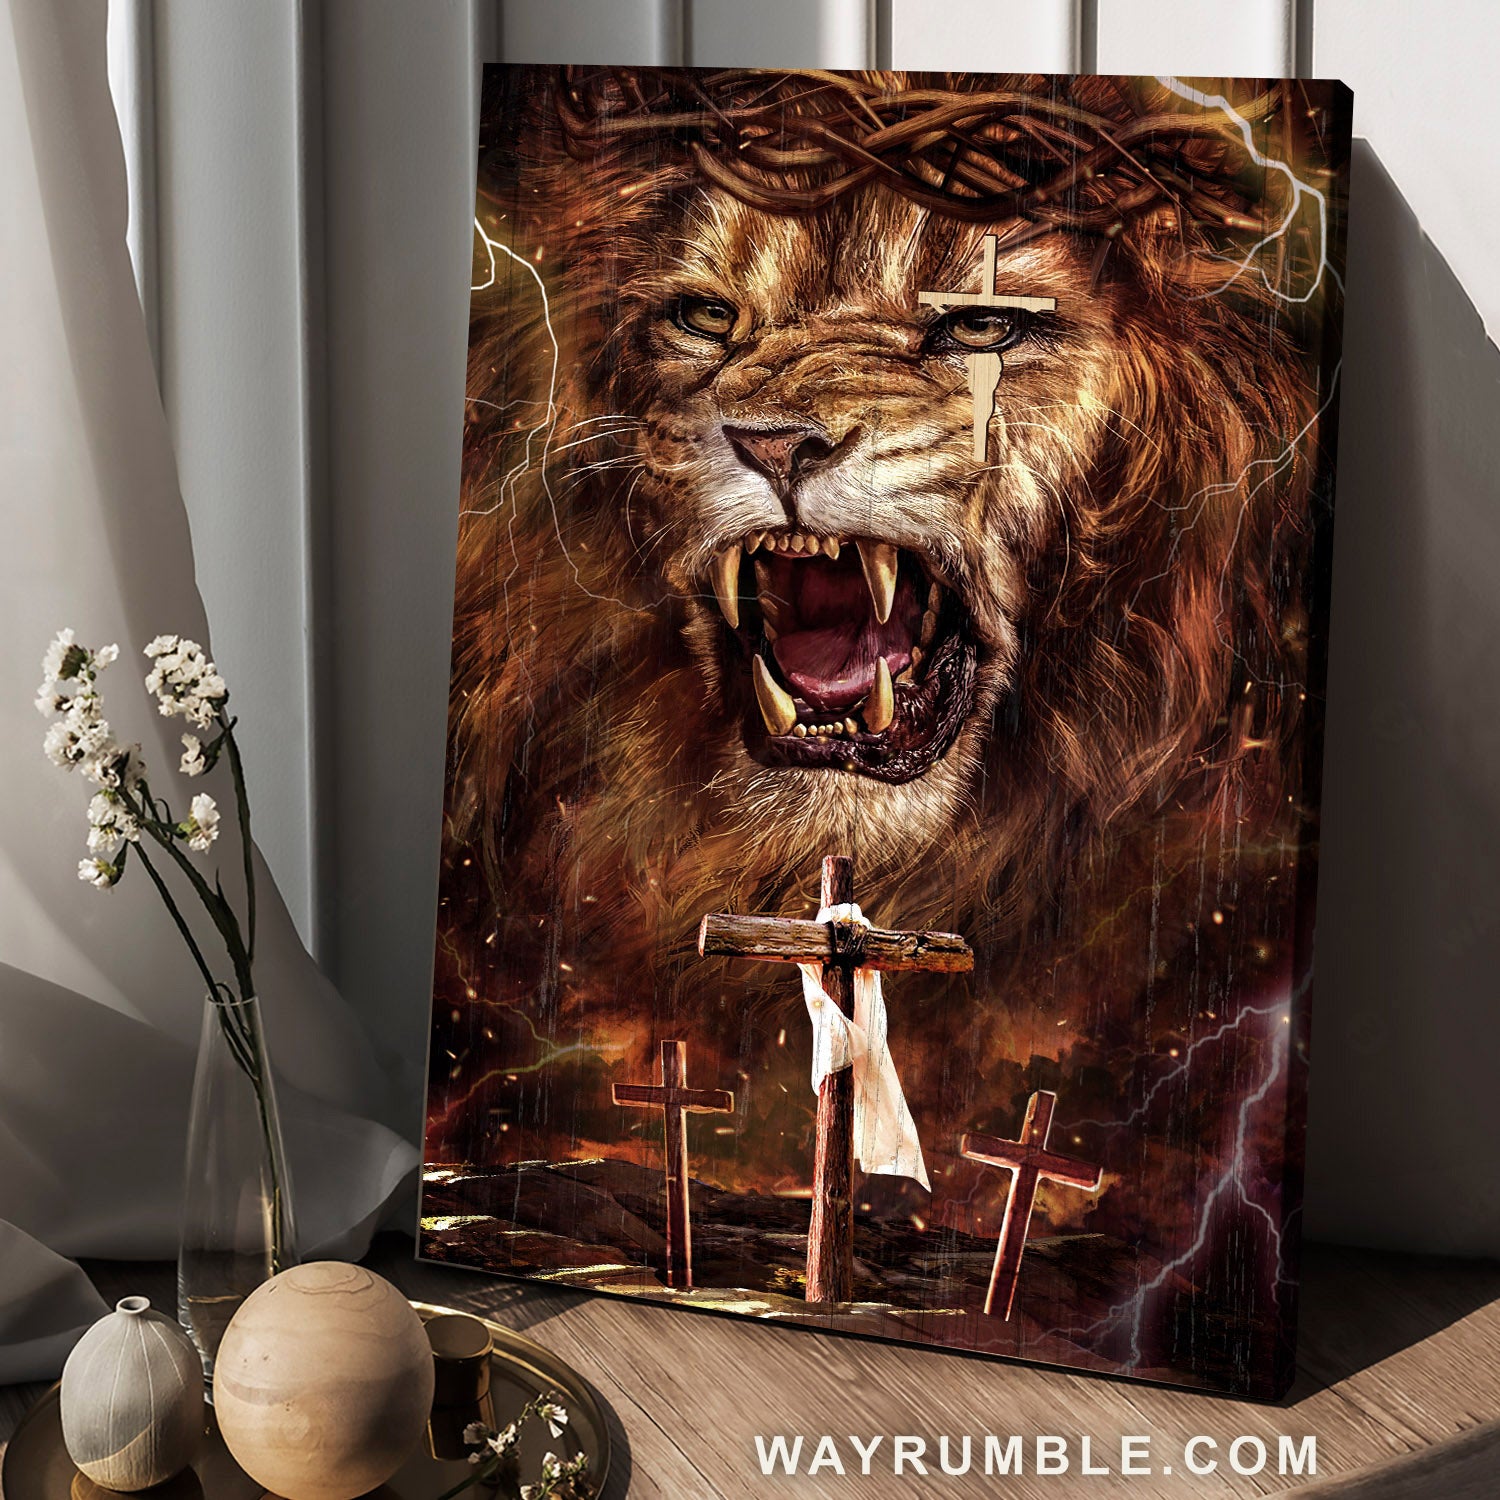 UPABLUNSO Diamond Painting Lion of Judah Christian Cross Jesus Thorn and  Crown Dove Vintage Religious Kit for Adults for Wall Home Decor 12x16 Inch